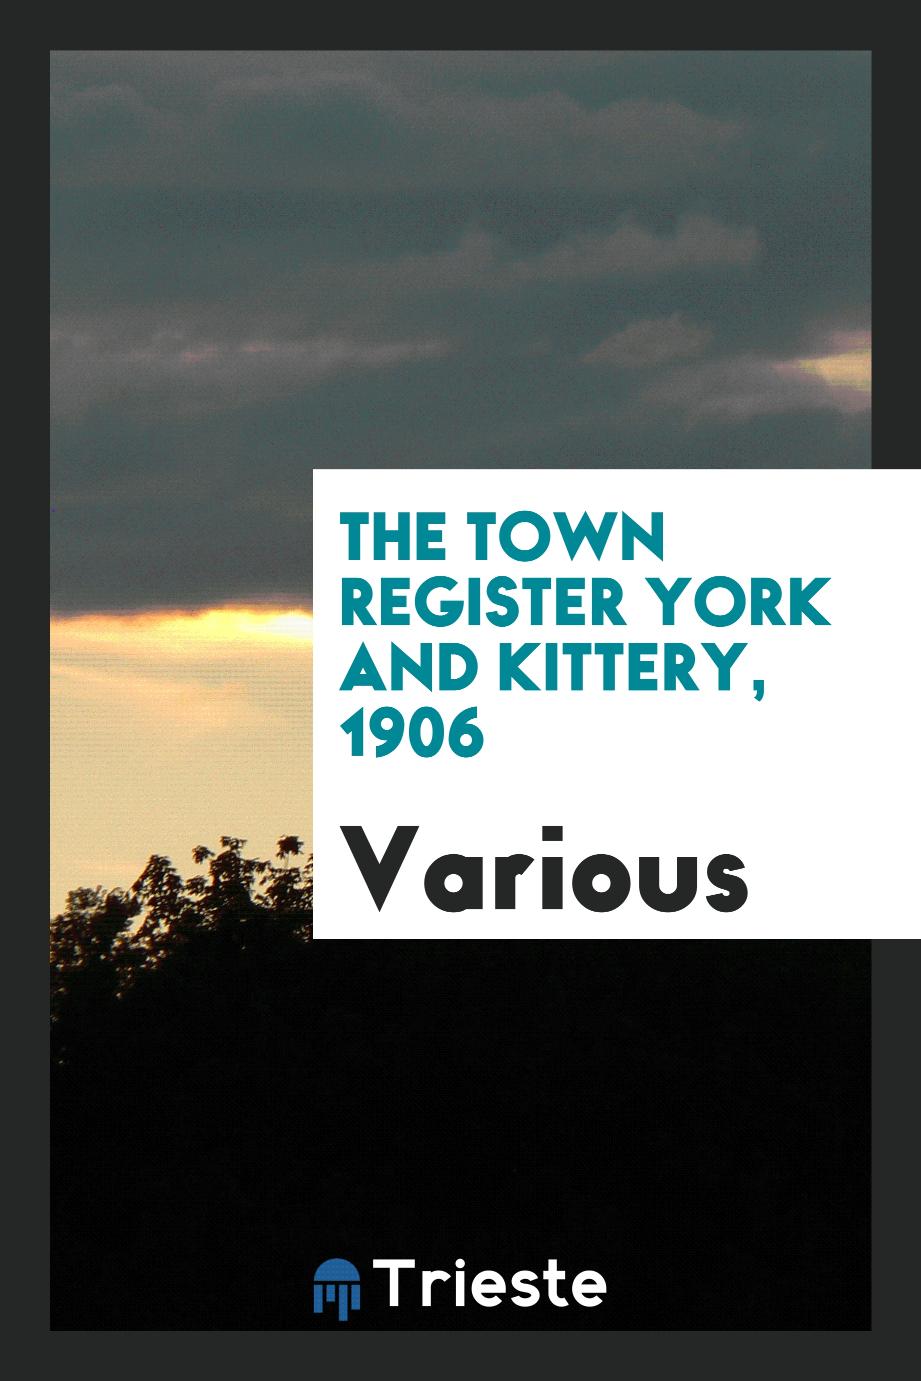 The town register York and Kittery, 1906